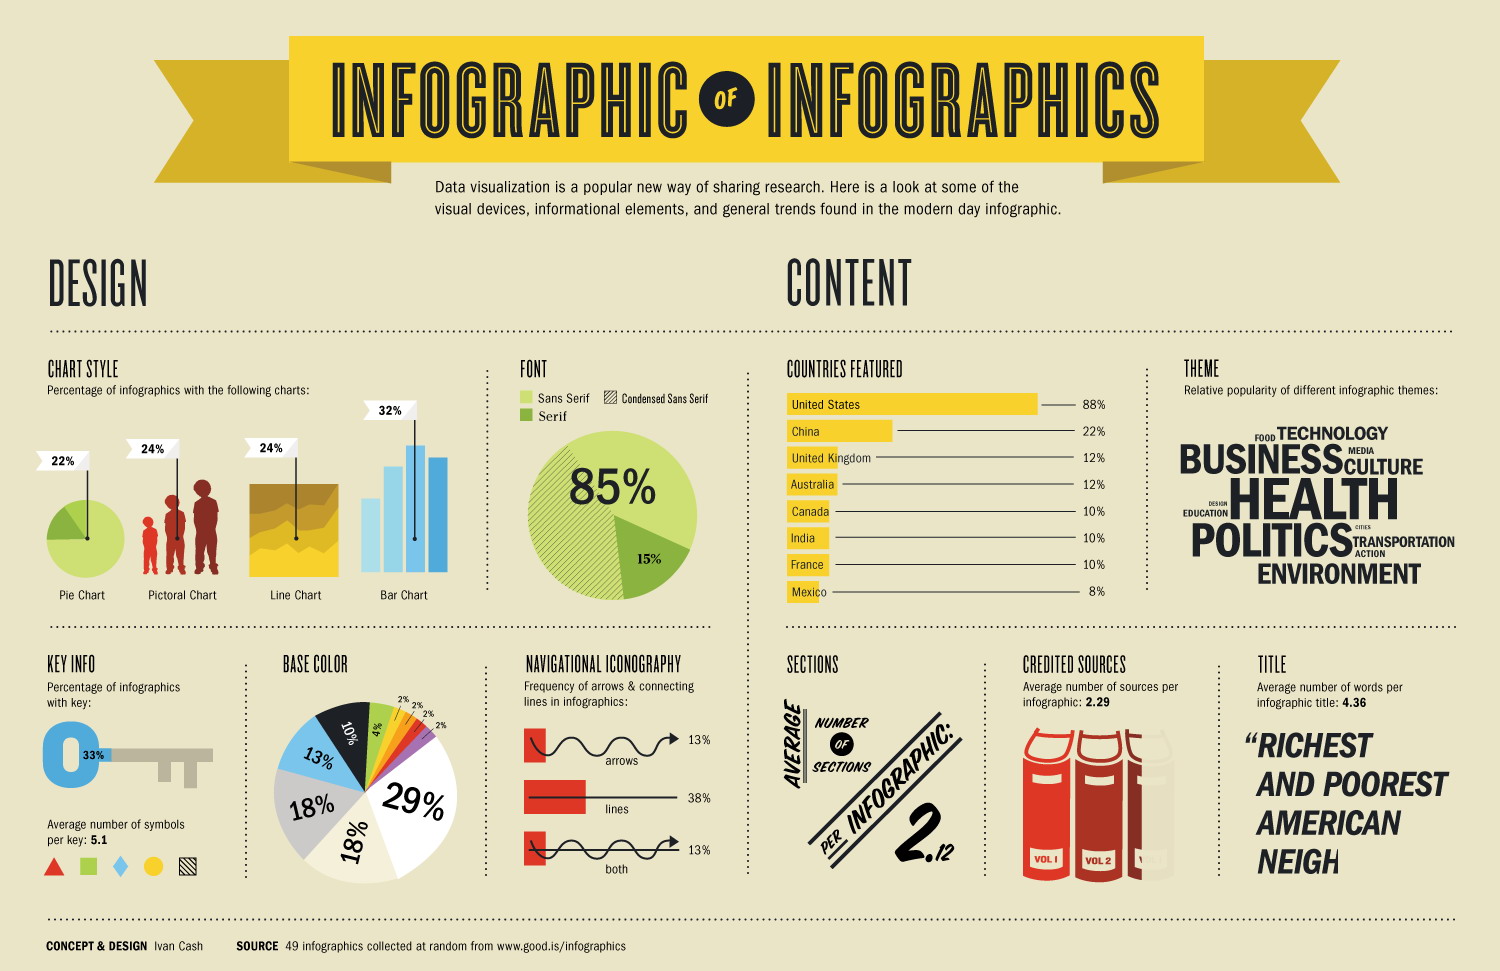 Cool infographic showing the elements of branding | Brand awareness, Infographic, Branding